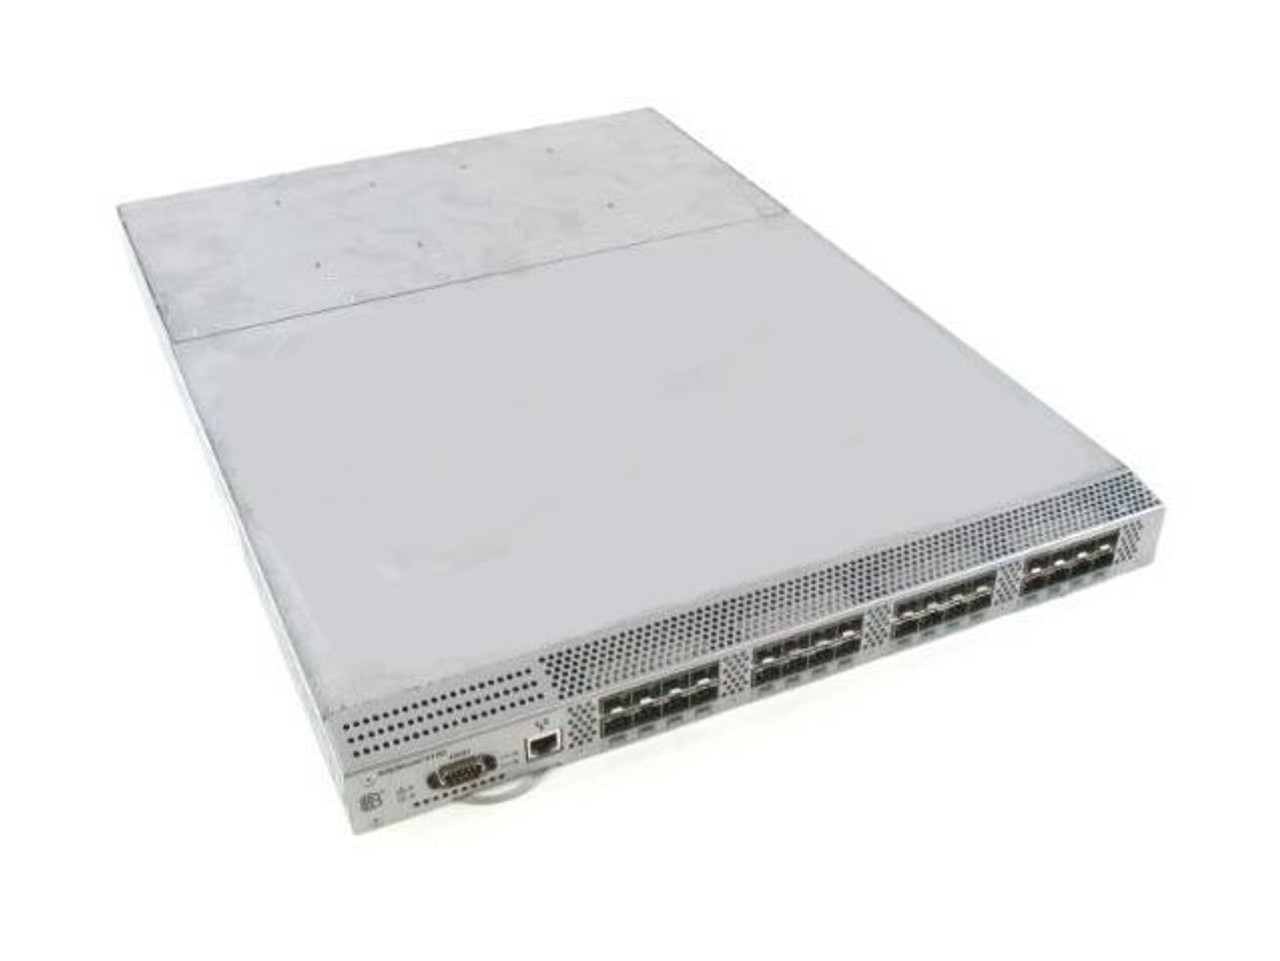 BR-4120-R0001-A Brocade Silkworm 4100 32-Ports 4Gbps Fibre Channel Switch with 16x Active Ports (Refurbished)